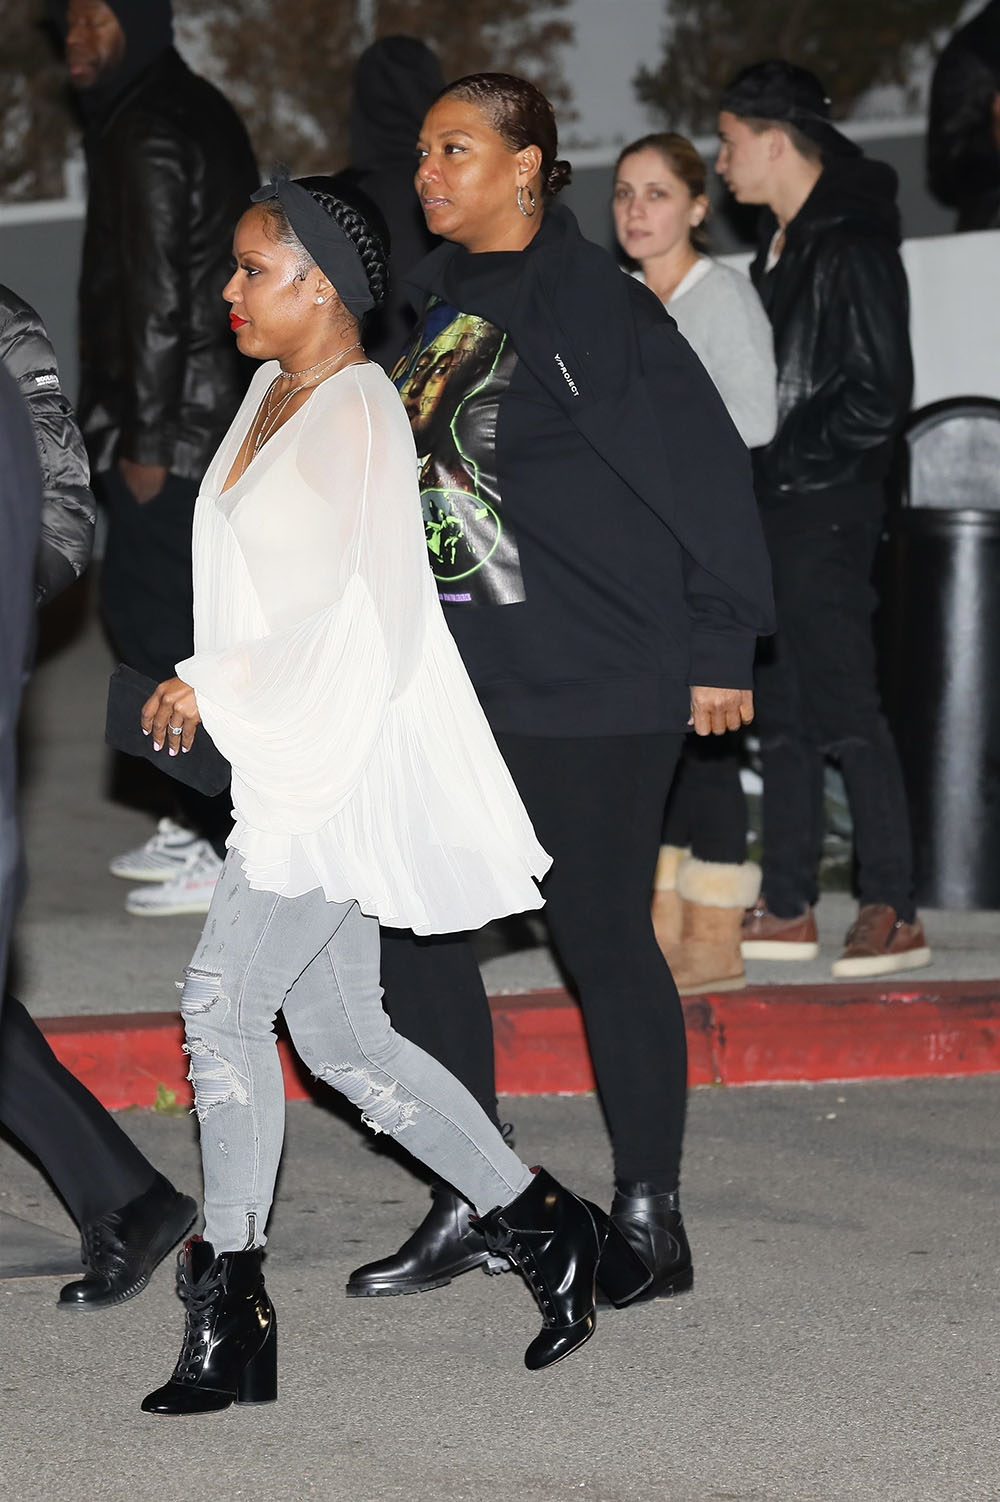 Queen Latifah and girlfriend Eboni attend Jay-Z's concert at The Forum ...